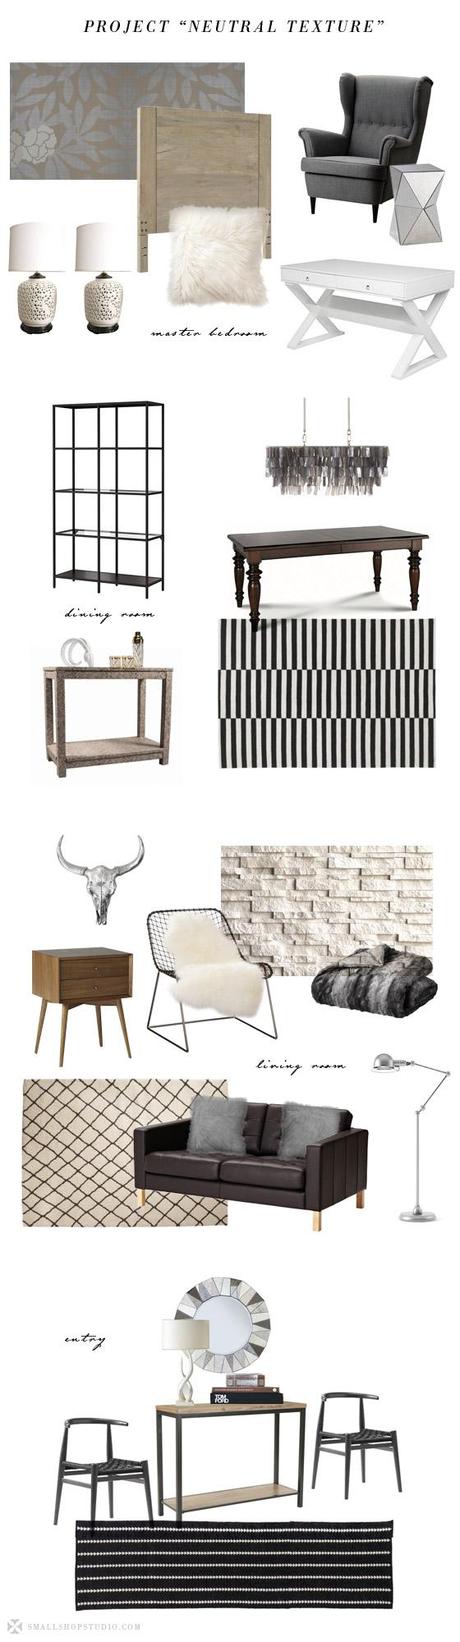 NEUTRAL TEXTURE Project Concept Board